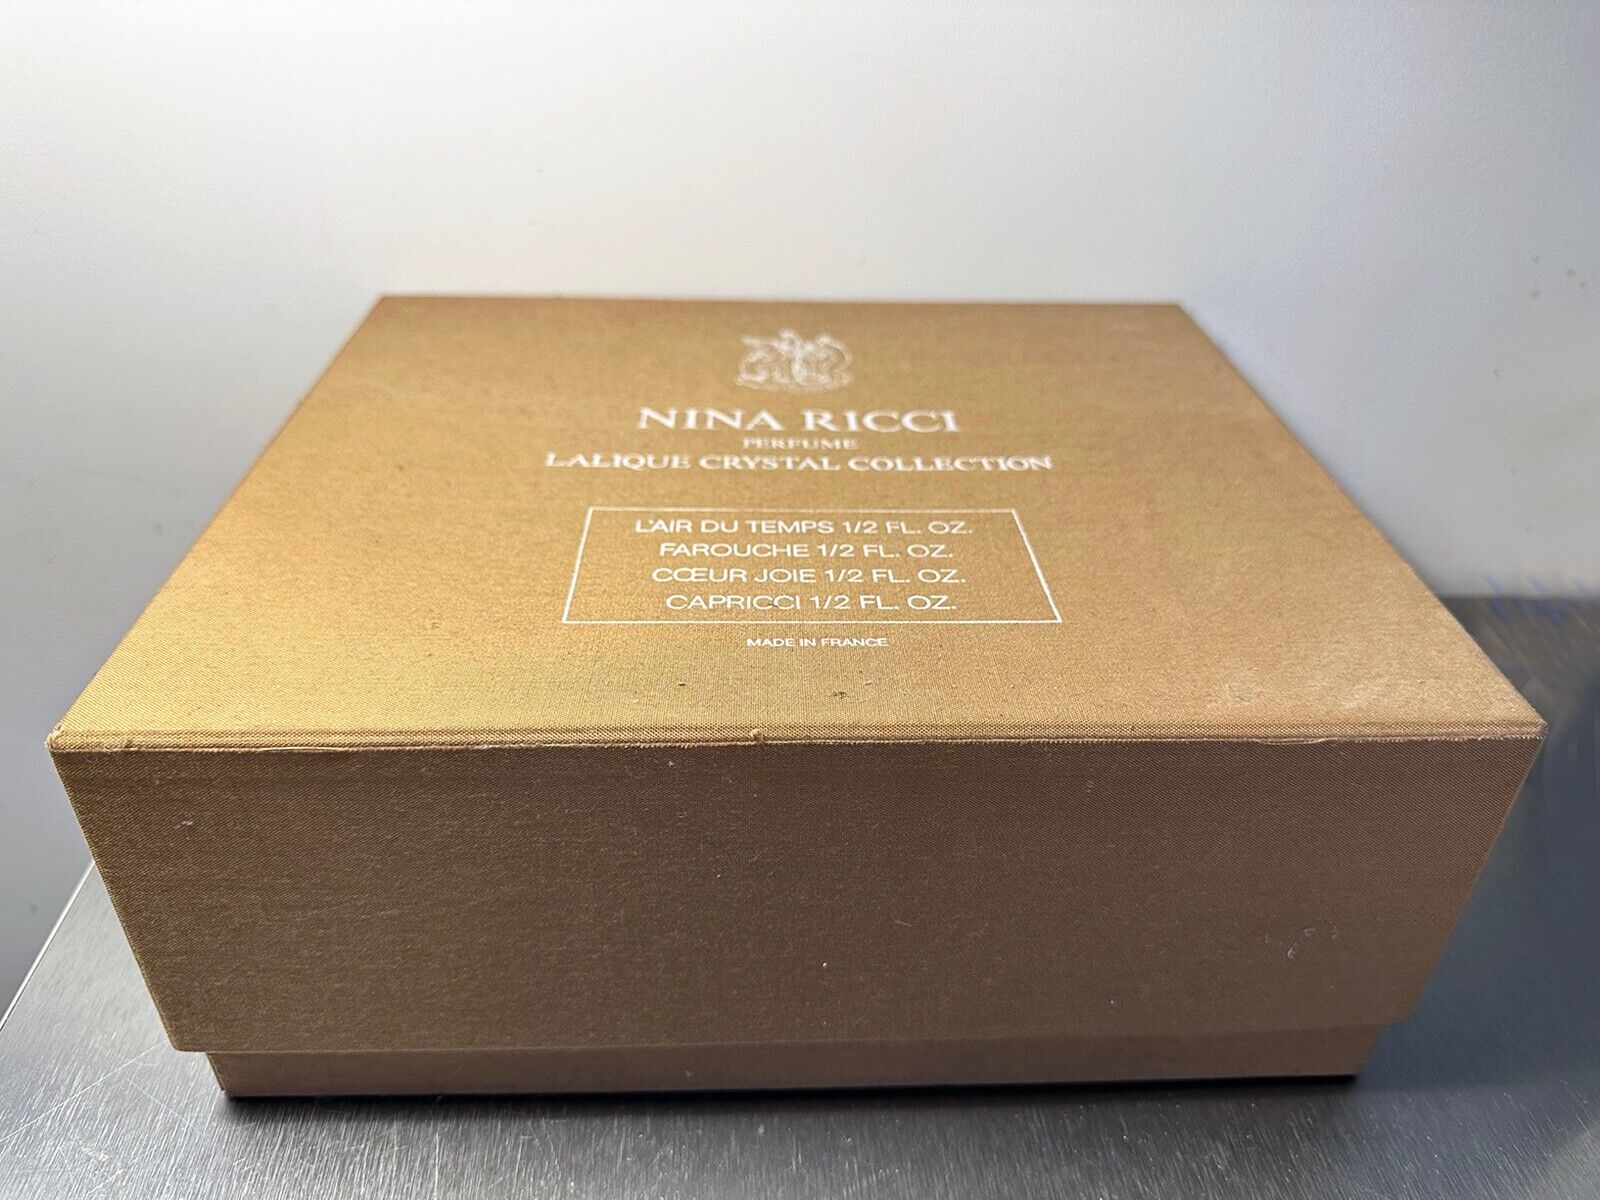 Vintage Nina Ricci Lalique Crystal Deluxe Perfume Collection with Presentation B